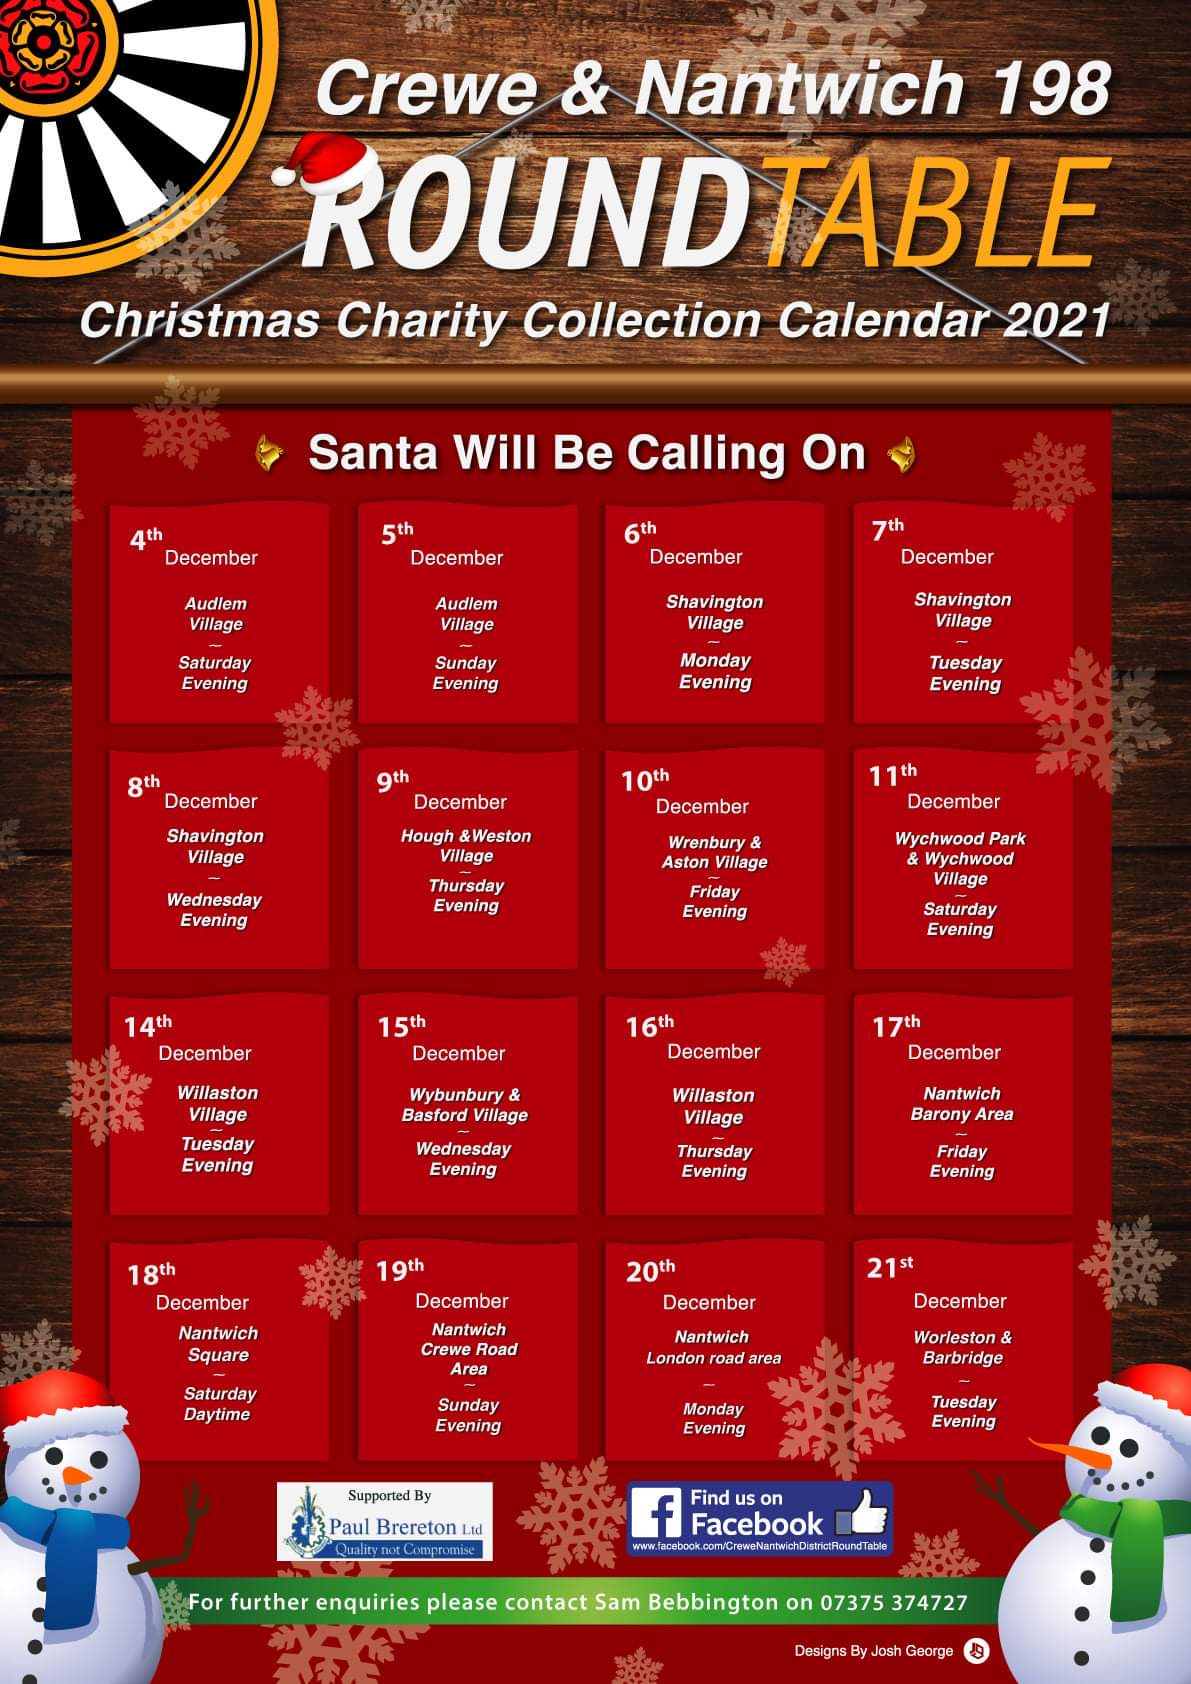 Crewe and Nantwich Round Table Santa schedule 2021